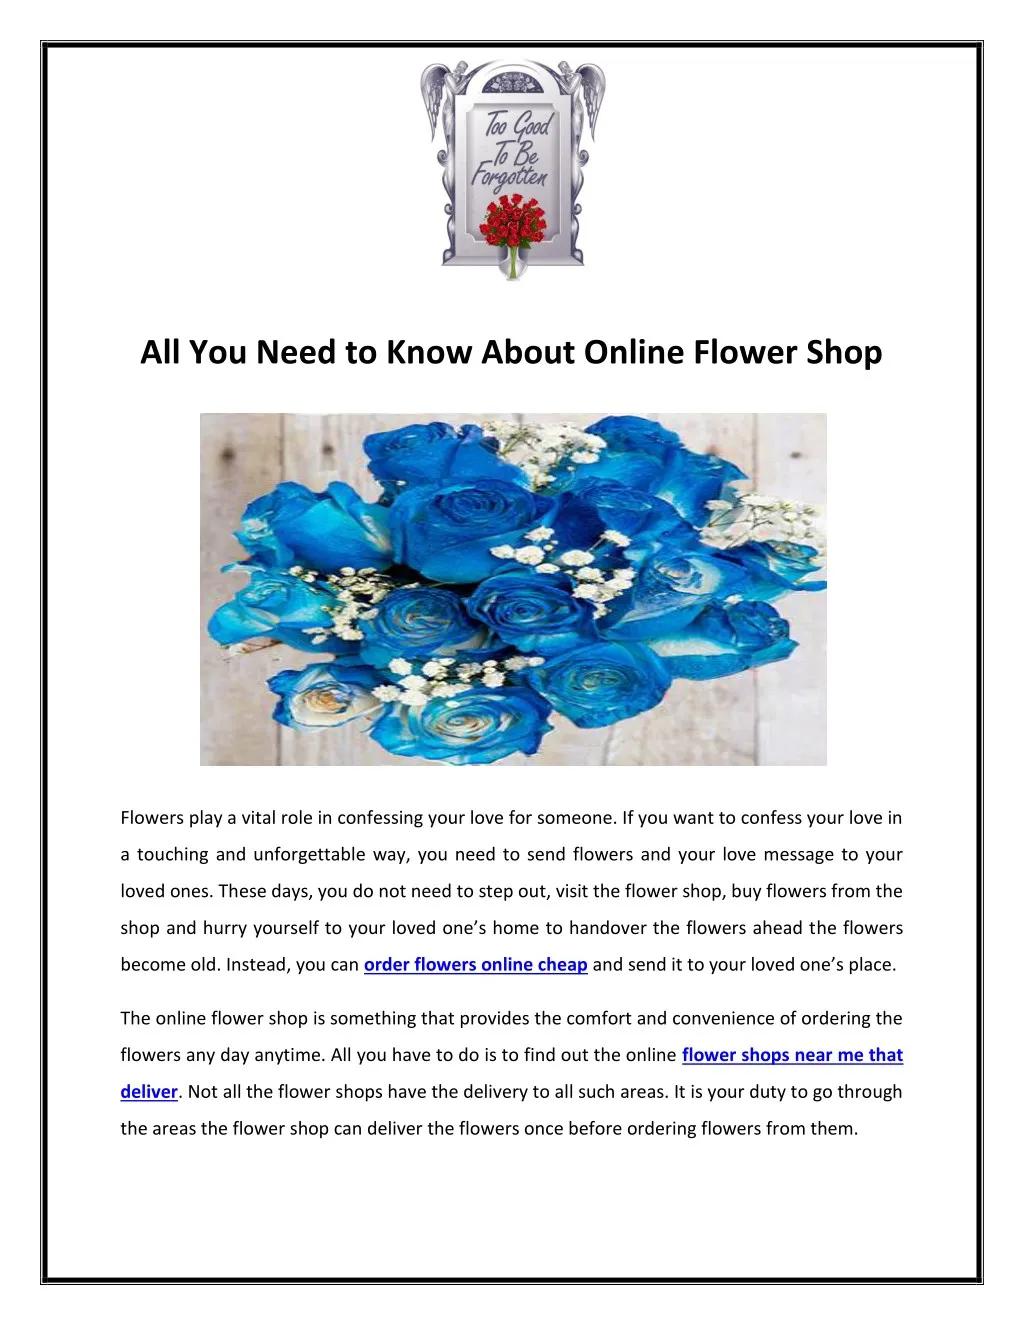 all you need to know about online flower shop